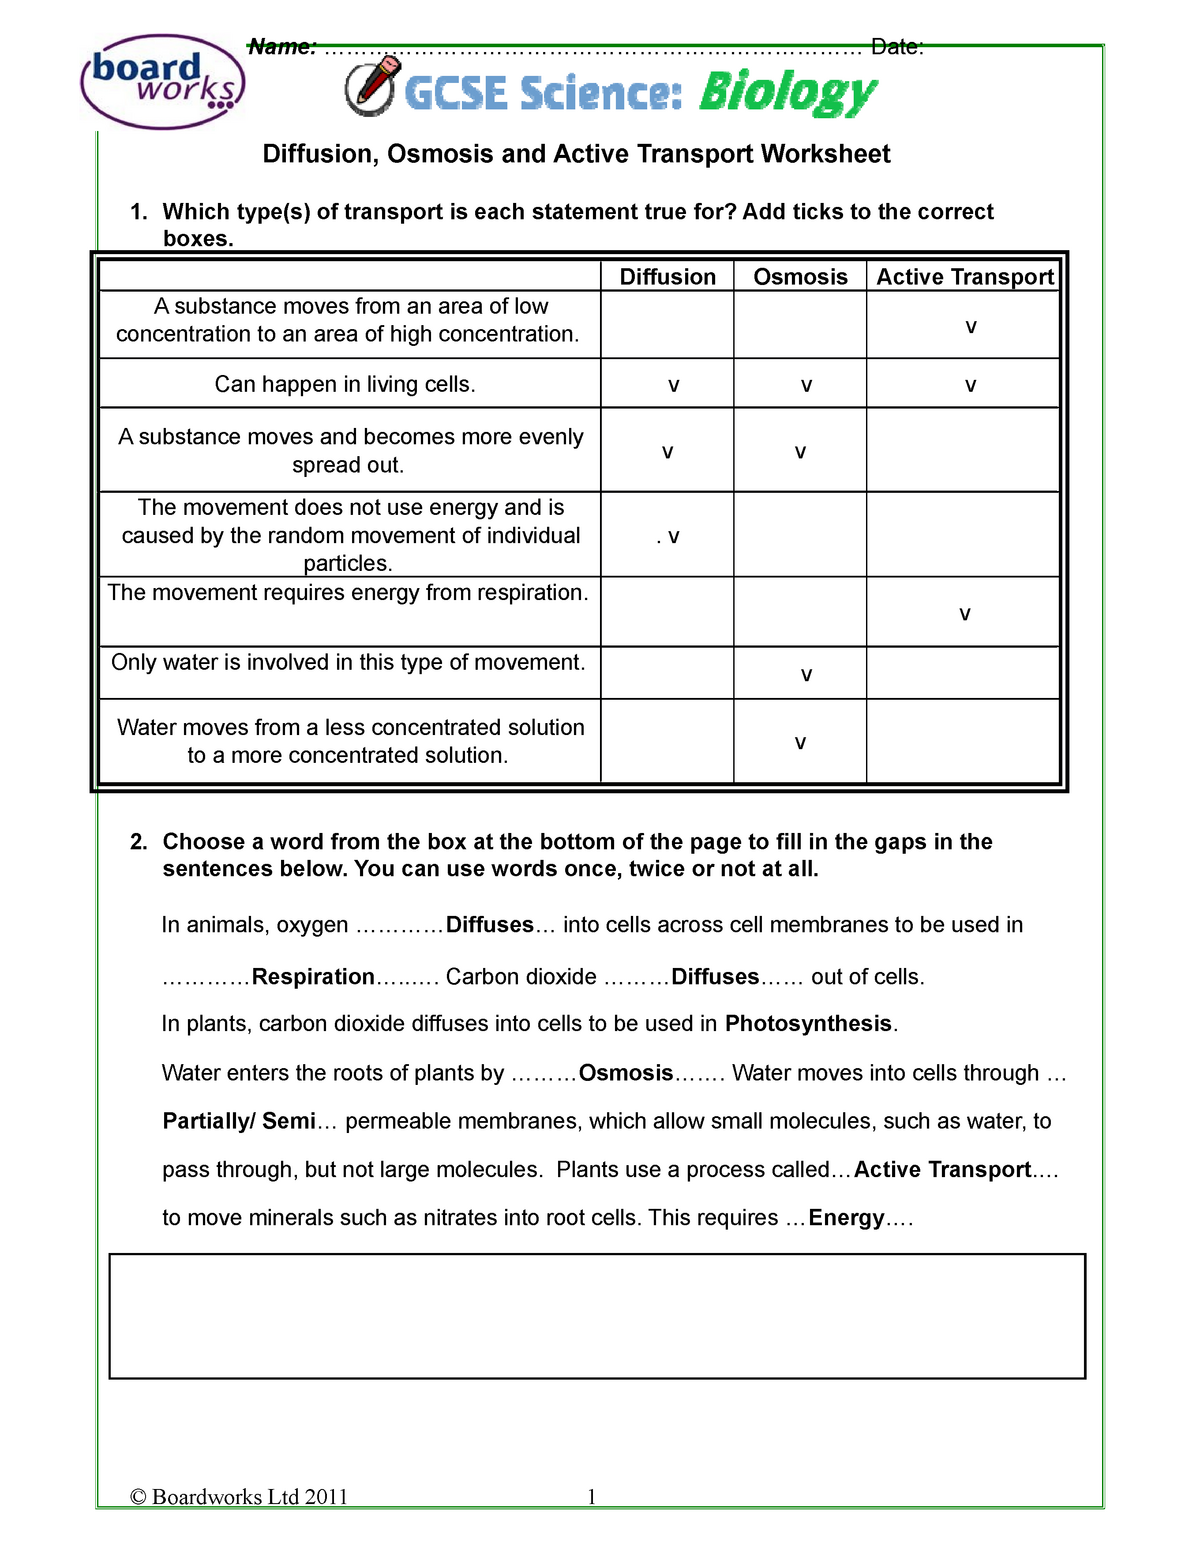 Diffusion Osmosis and Active Transport Worksheet F22 - BP 22 Pertaining To Passive And Active Transport Worksheet